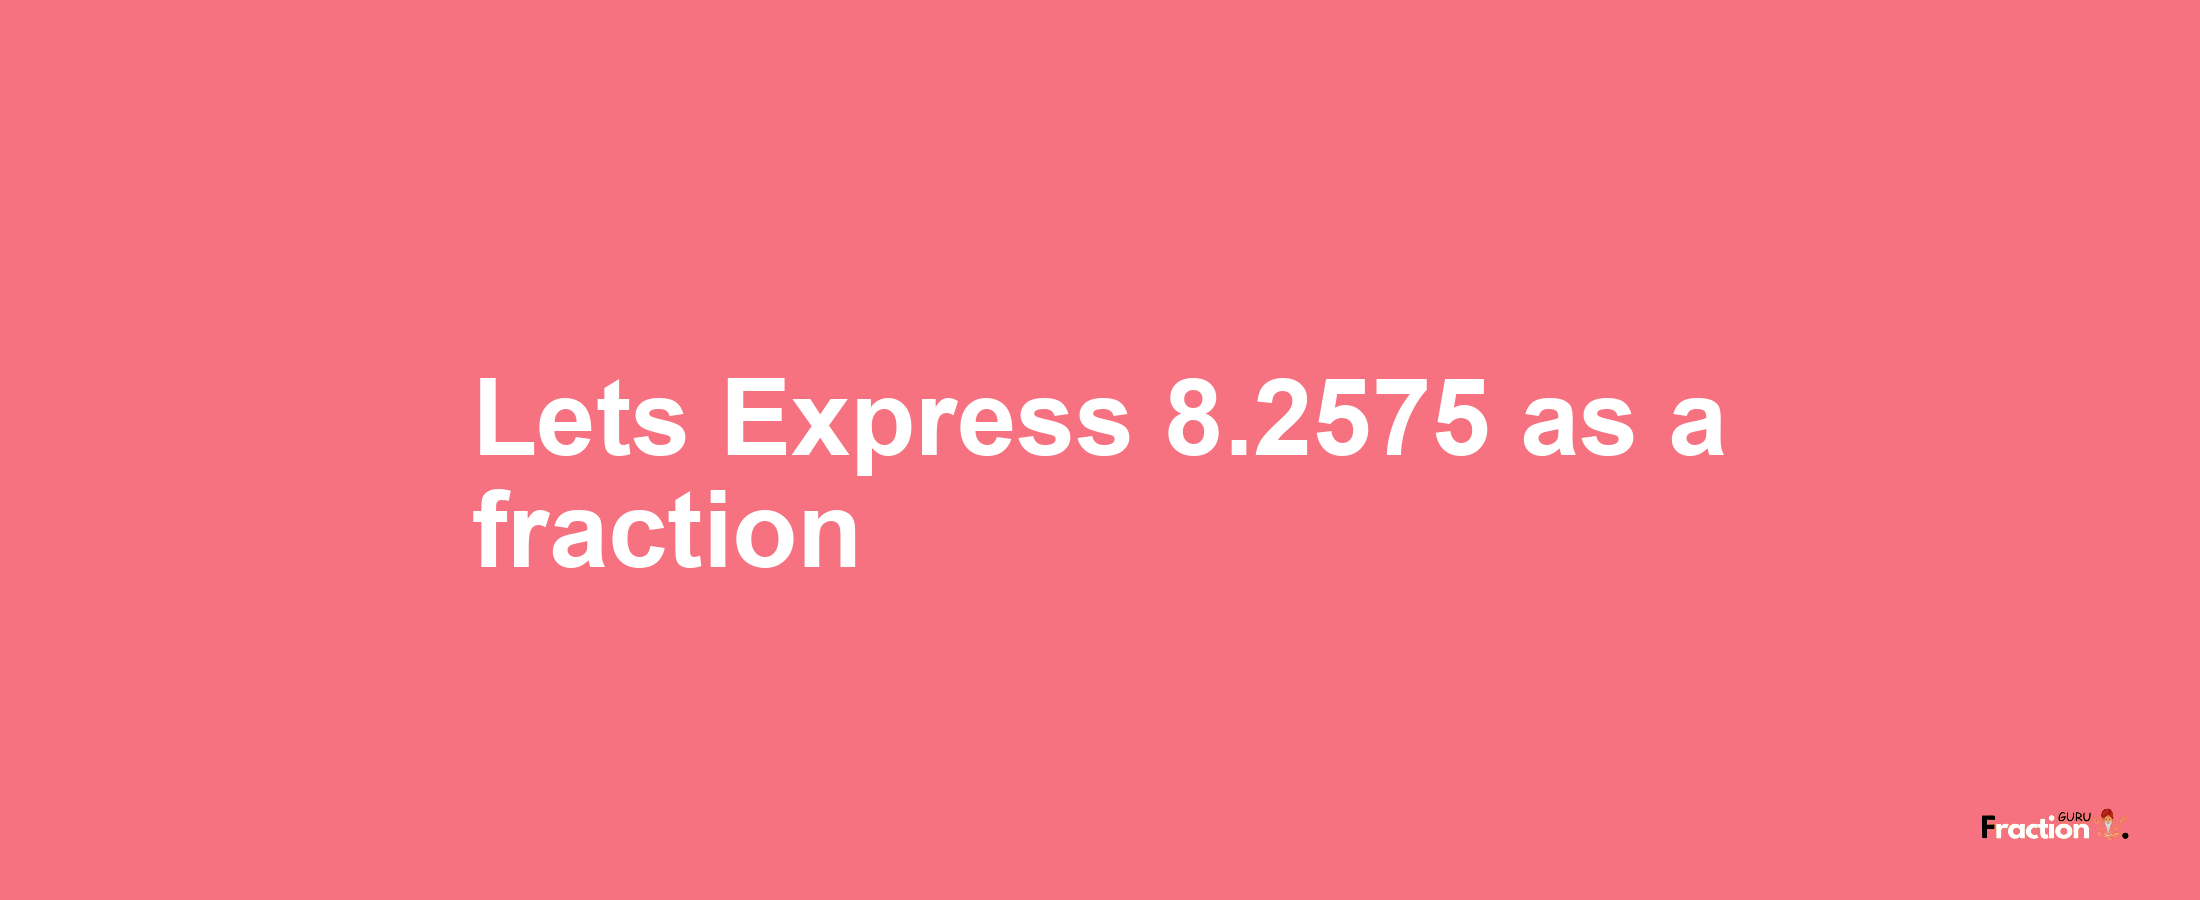 Lets Express 8.2575 as afraction